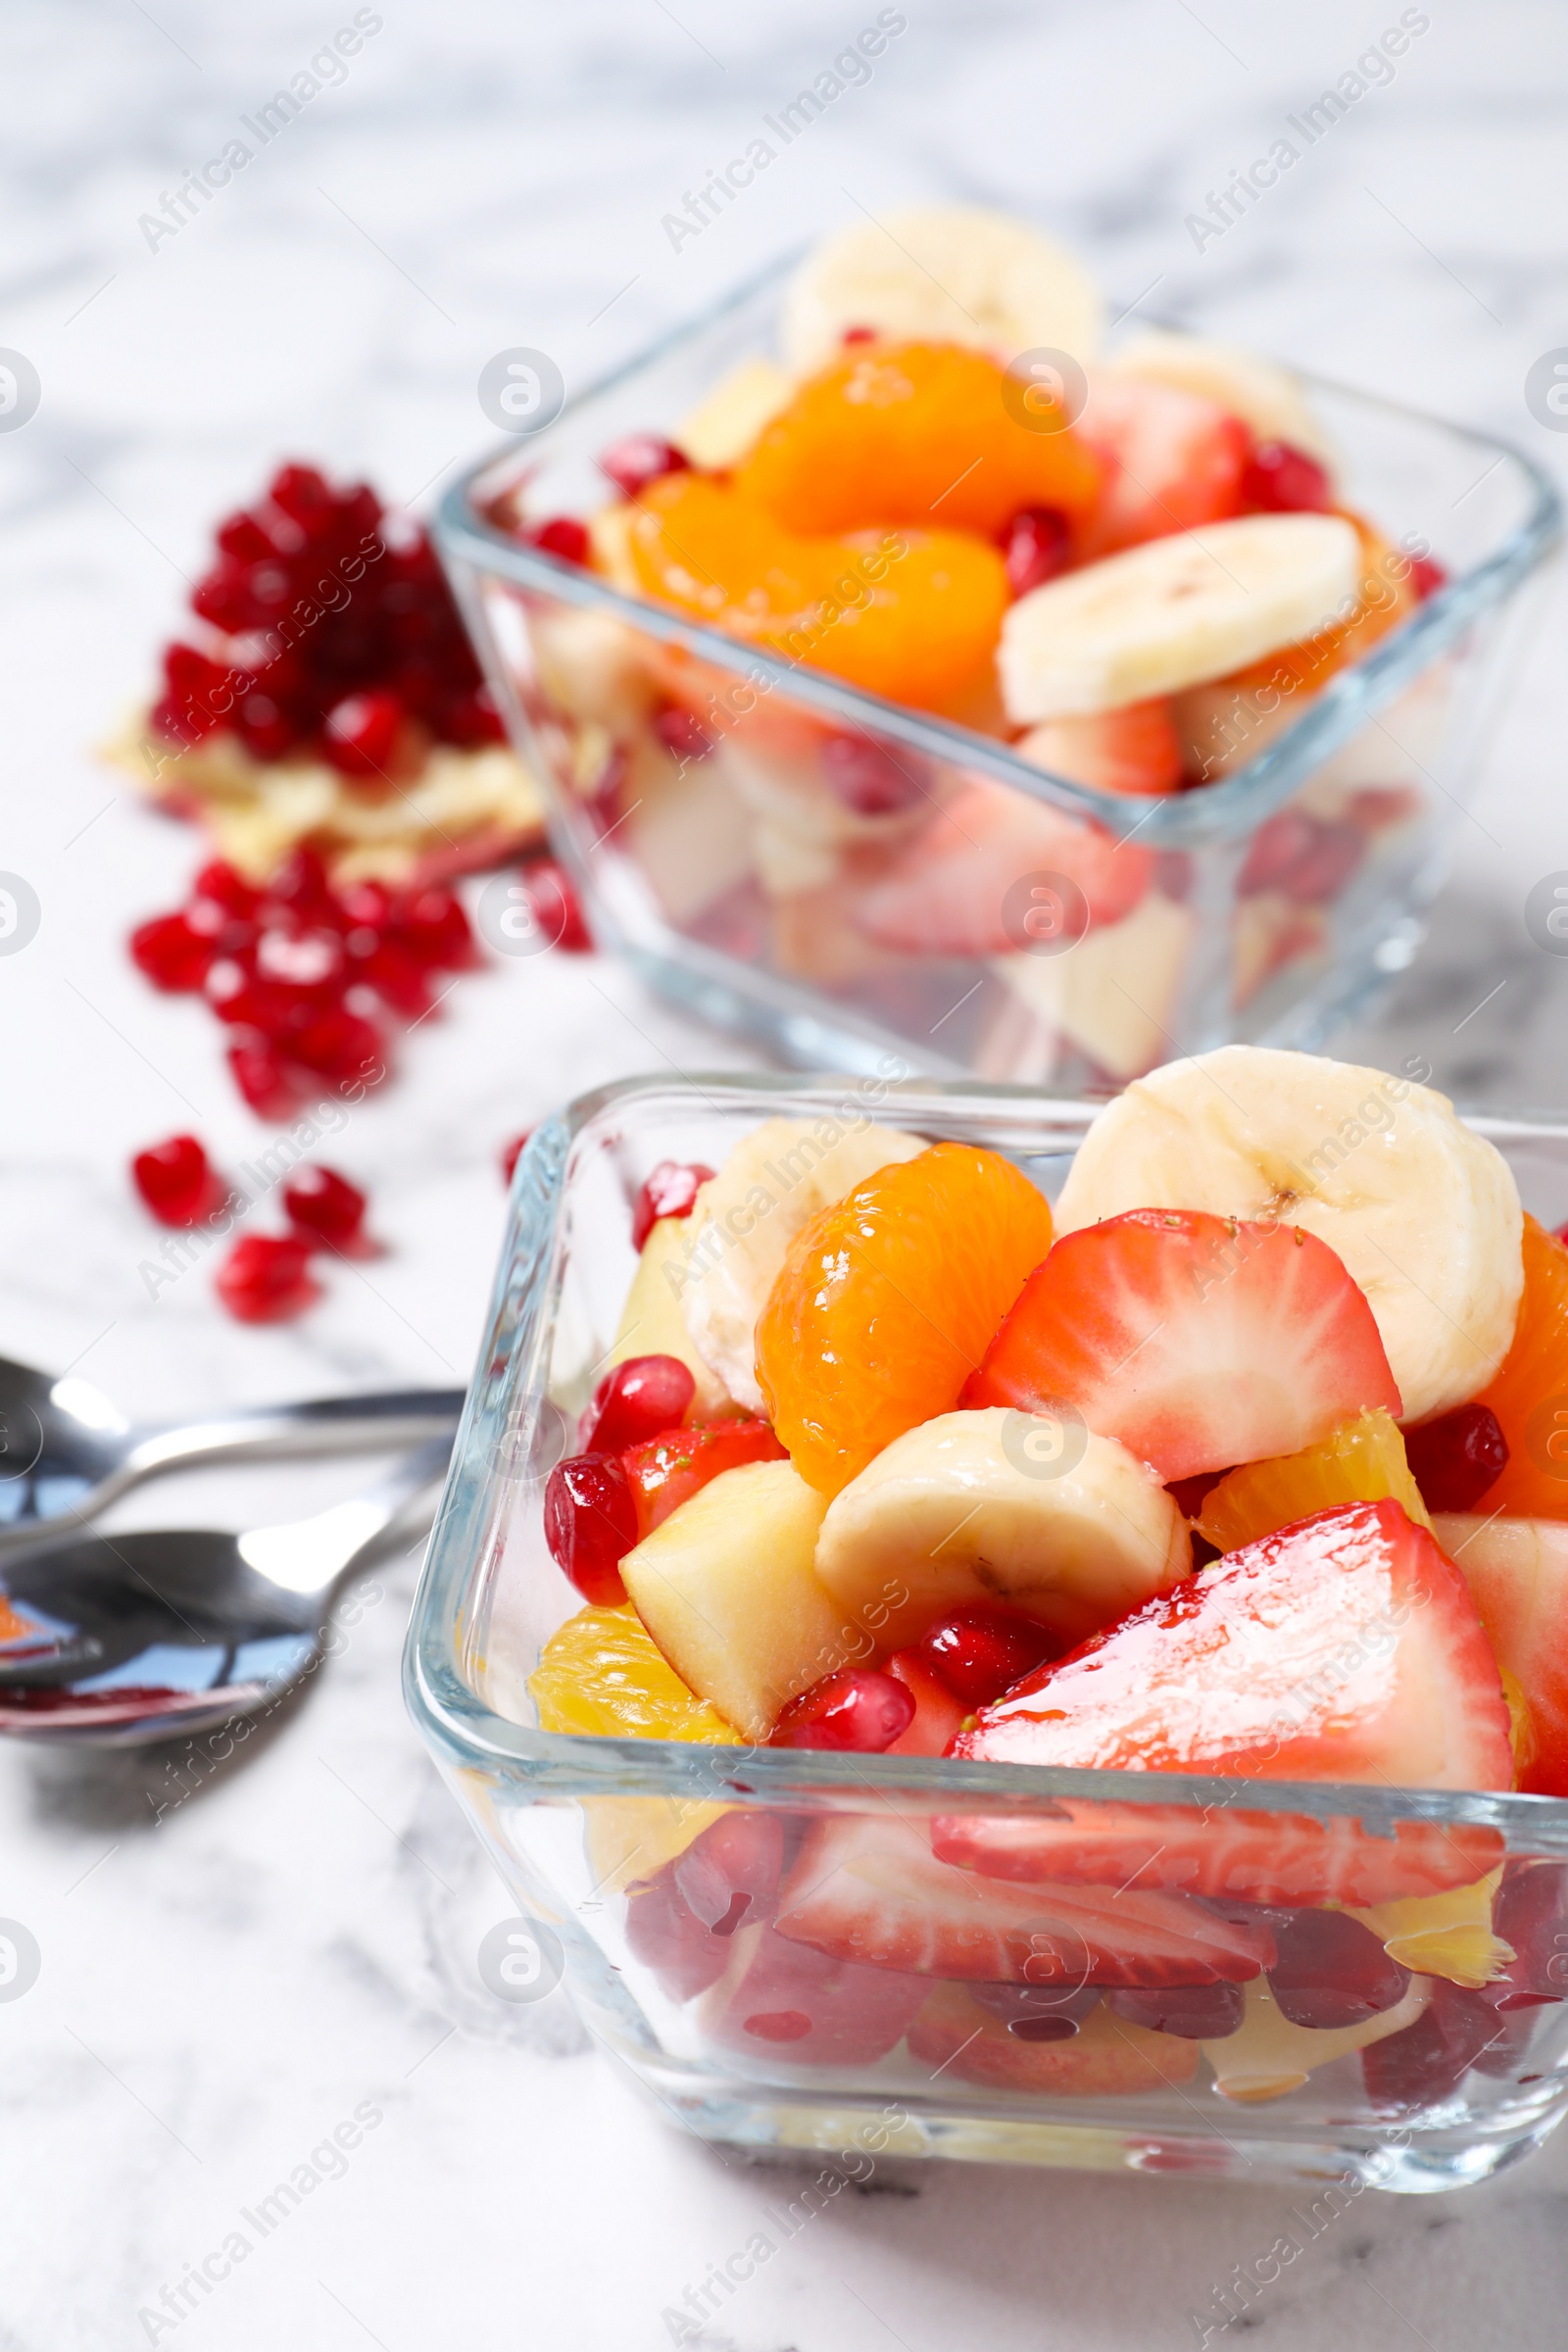 Photo of Delicious fresh fruit salad on white marble table